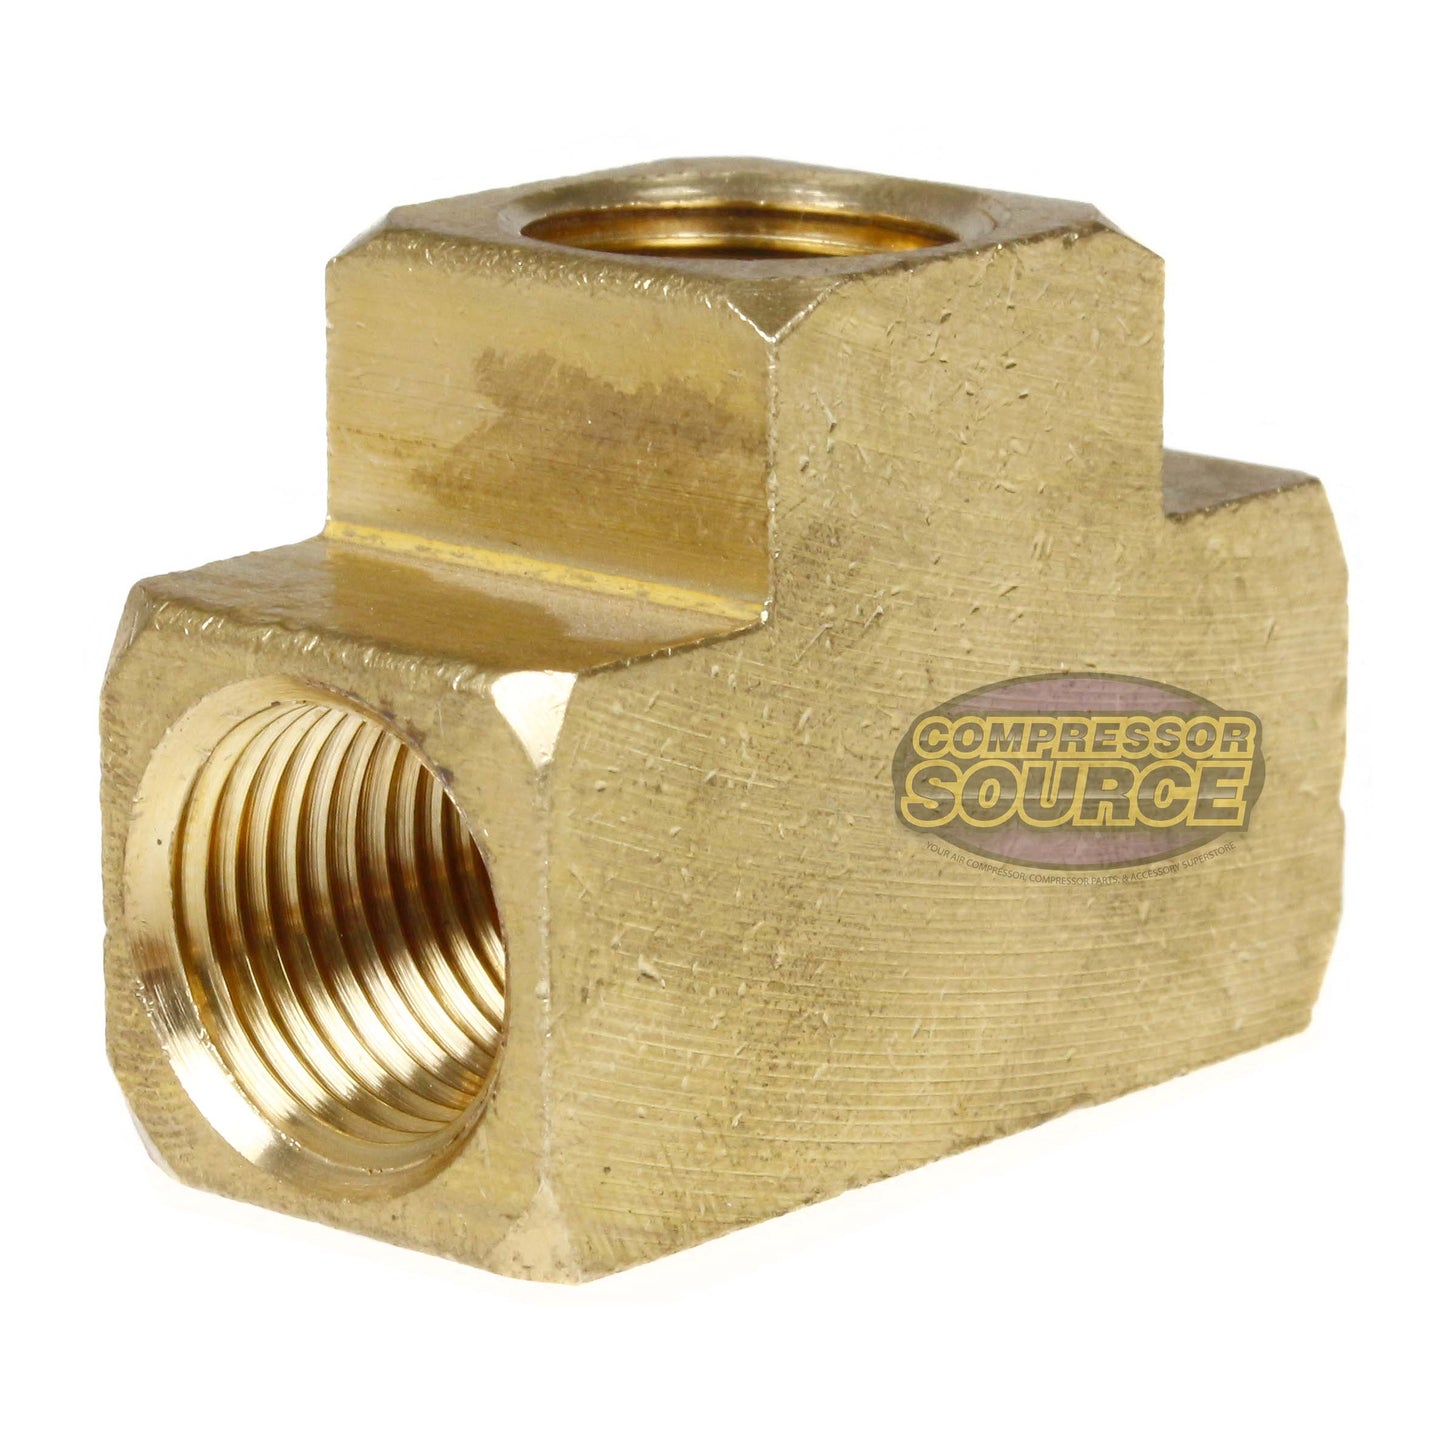 3/8" NPTF Female Union Tee Solid Brass Pipe Fitting T Joint Hose Connector New